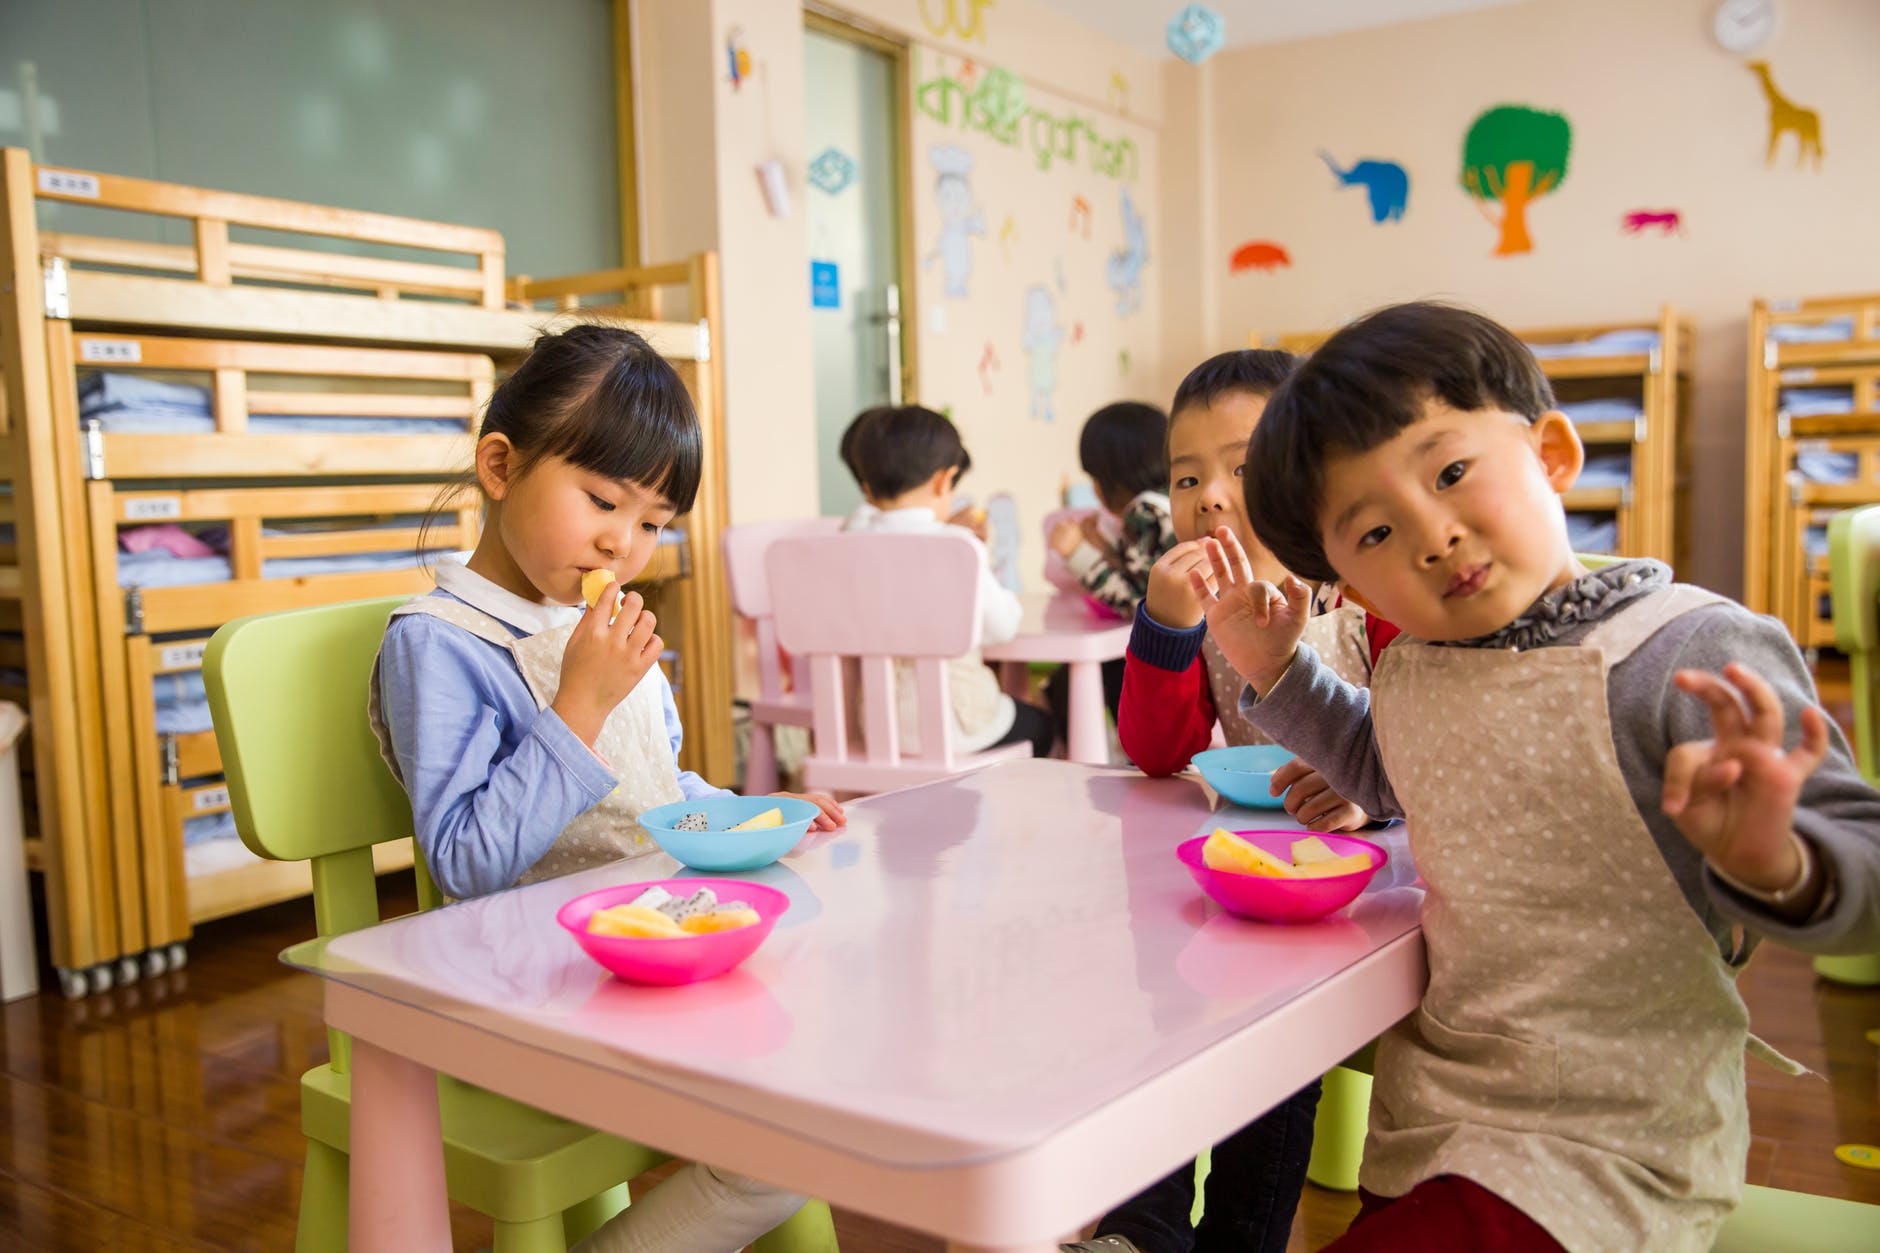 8 Tips for Parents with Picky Eaters